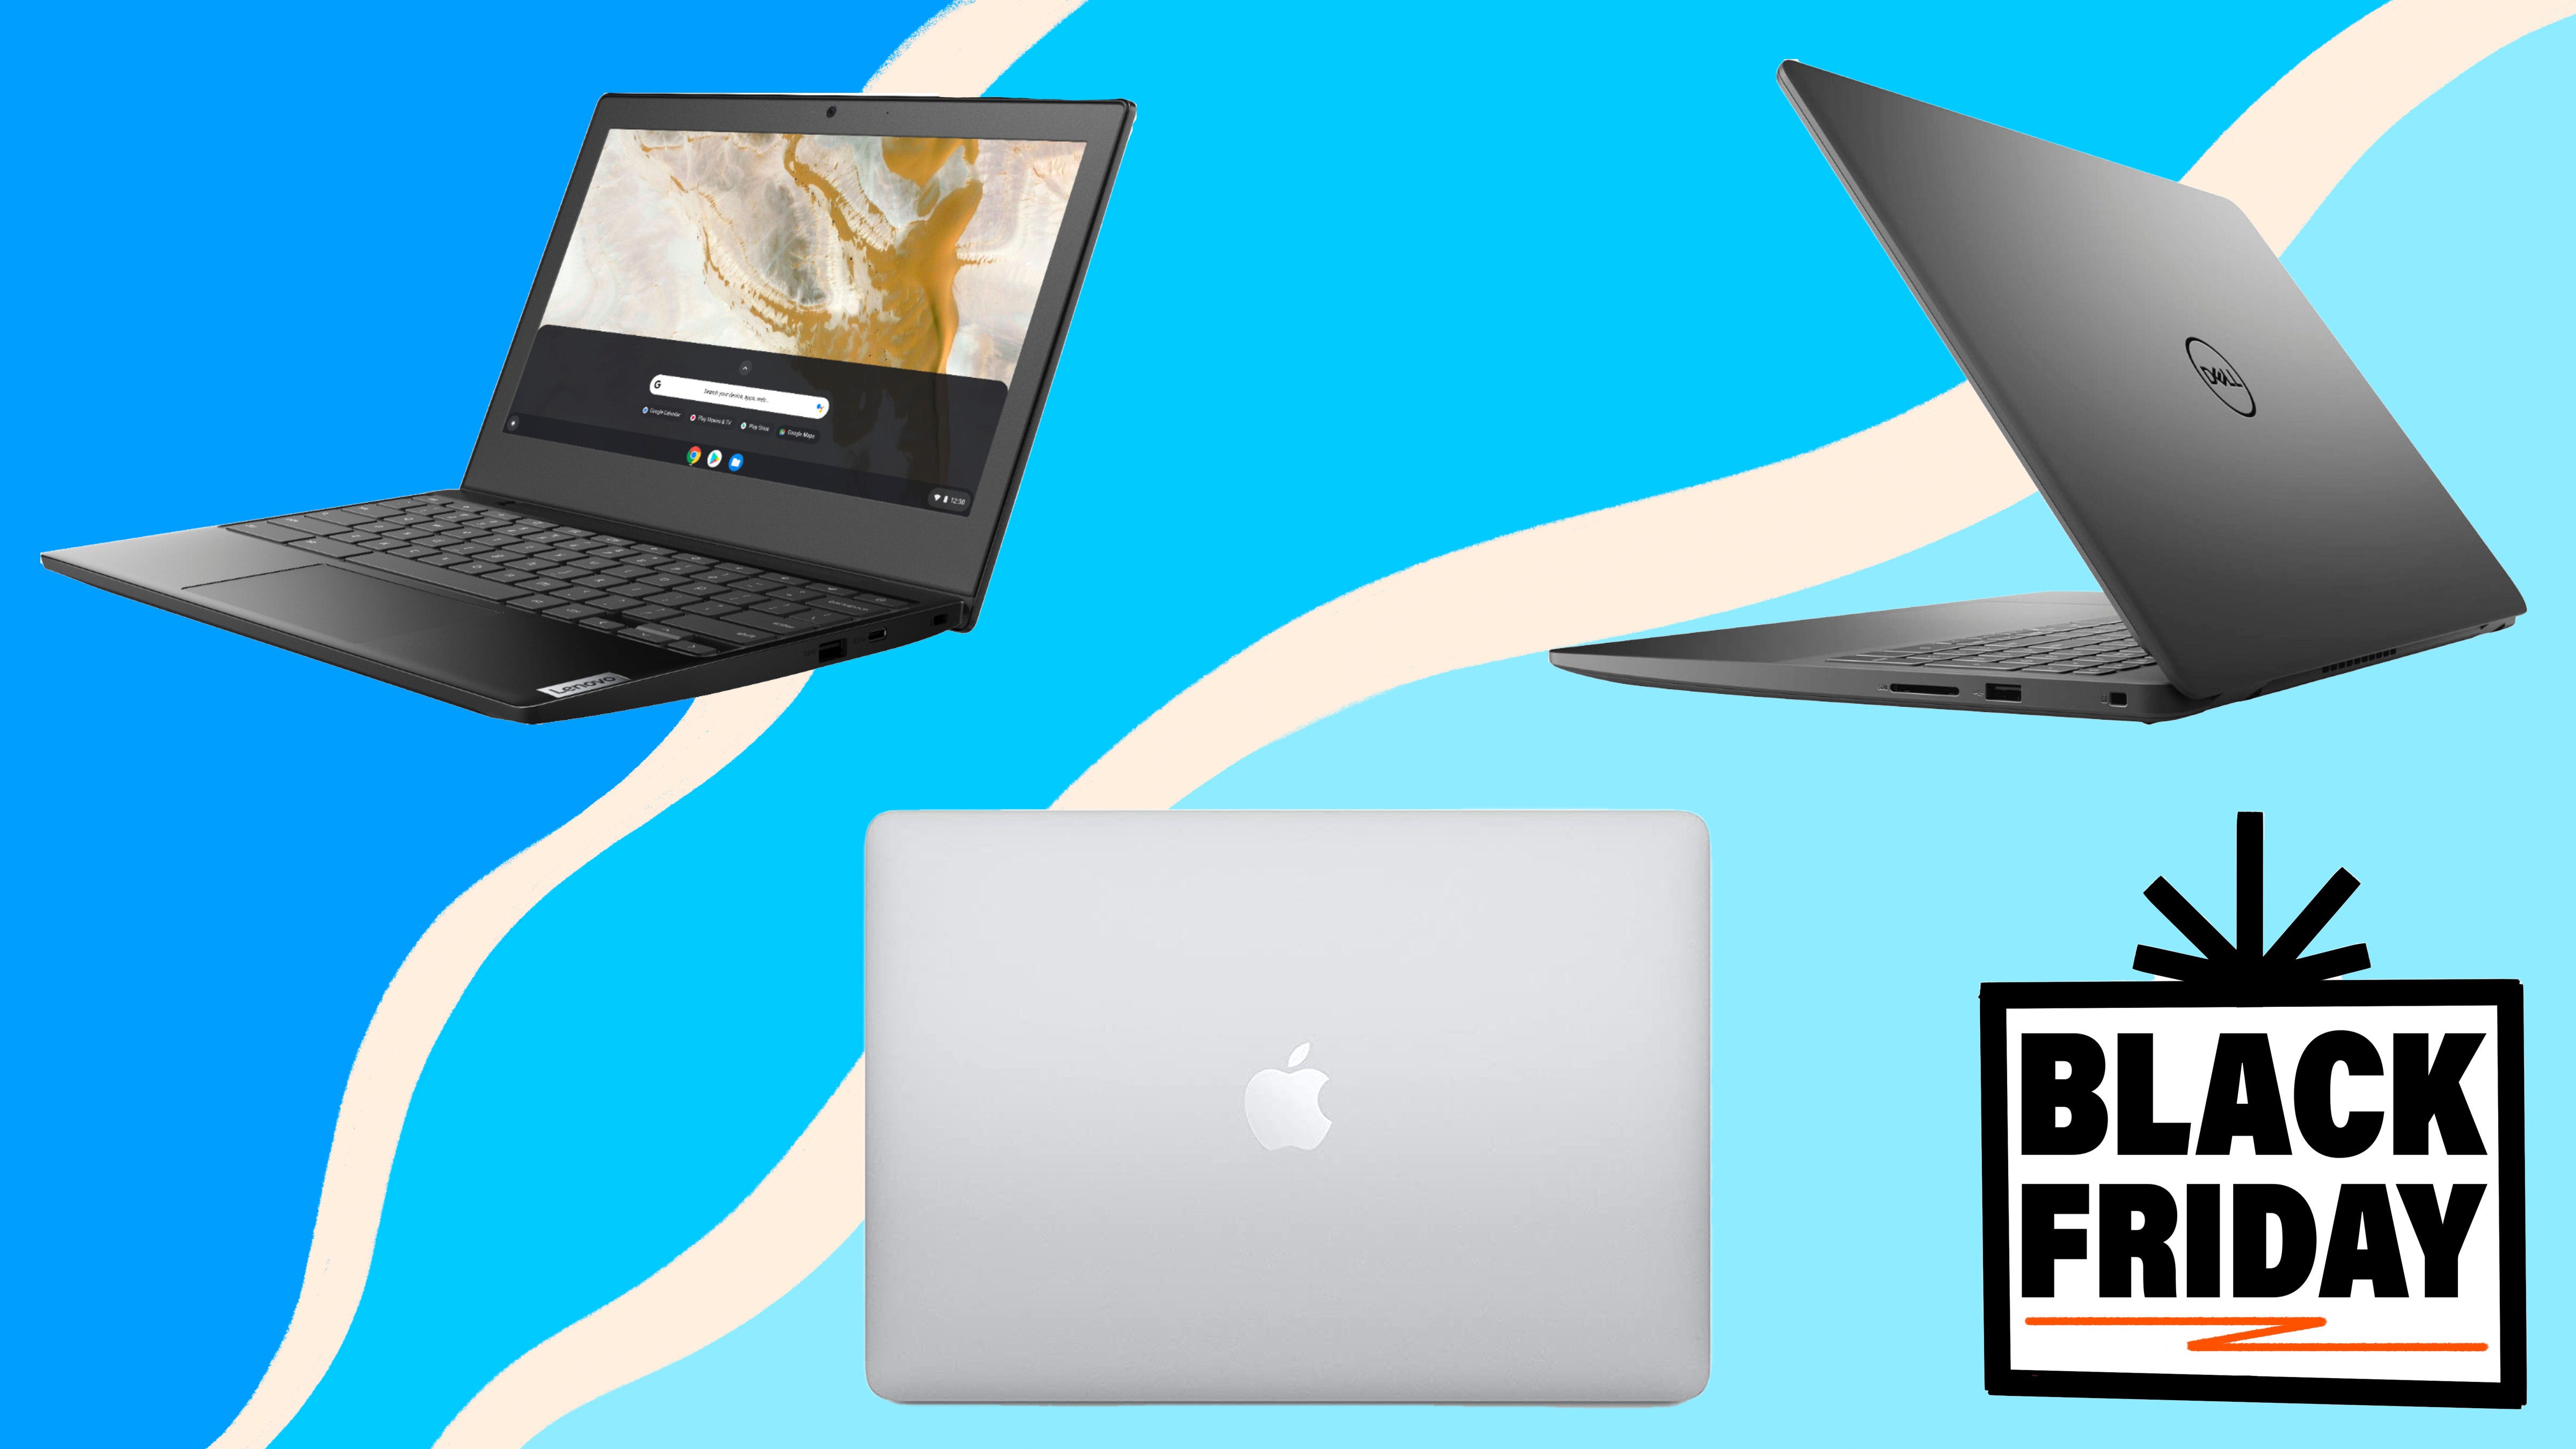 (Black Friday) The best Black Friday 2021 laptop deals you can get at HP, Best Buy and more